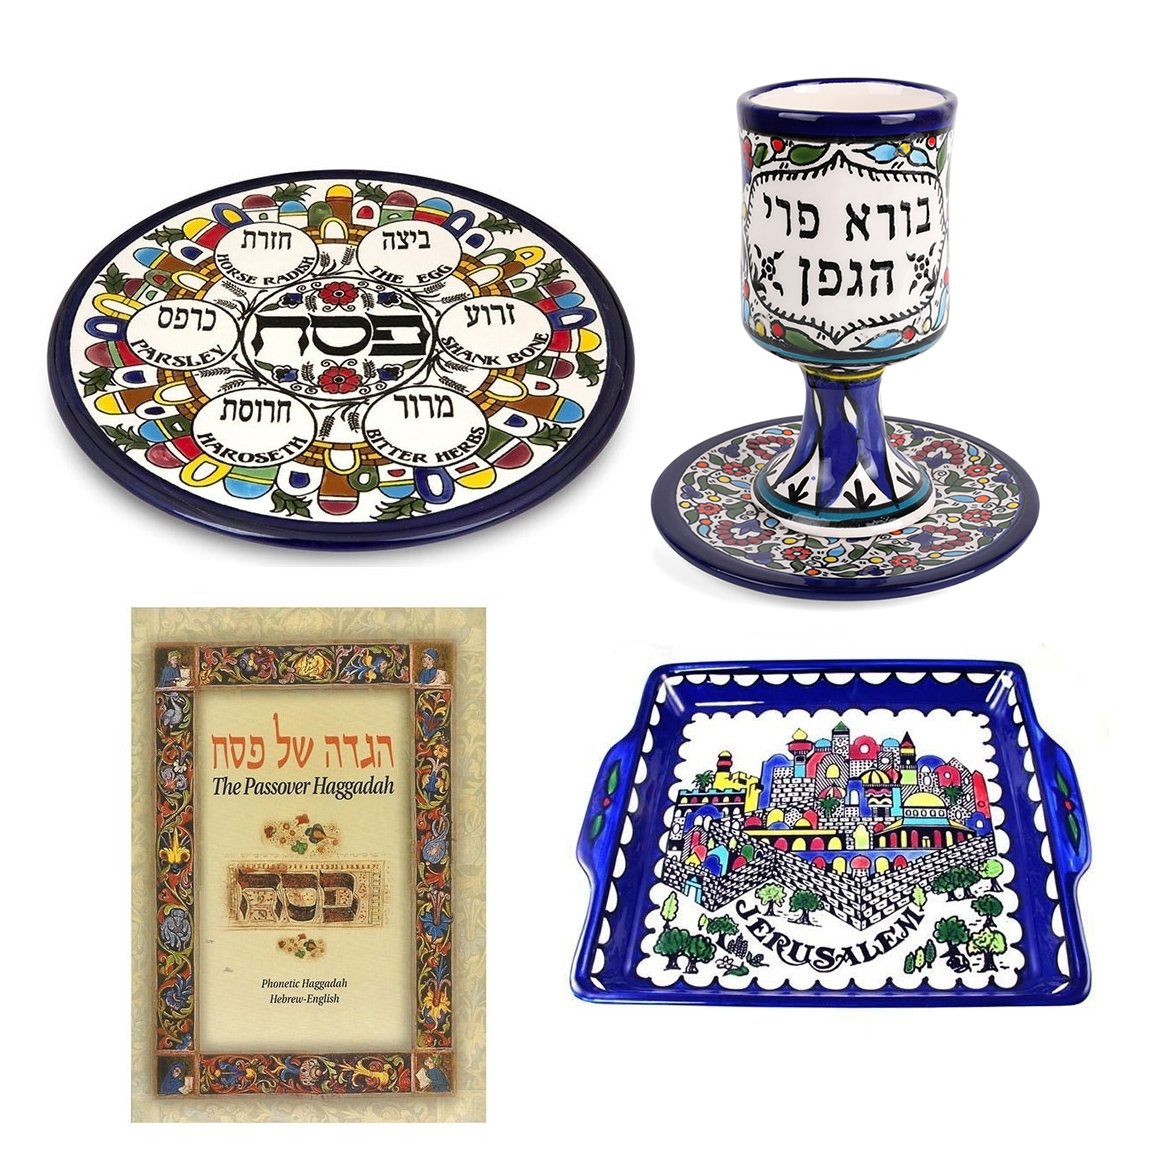 All-You-Need Passover Seder Gift Set By Armenian Ceramics - 1